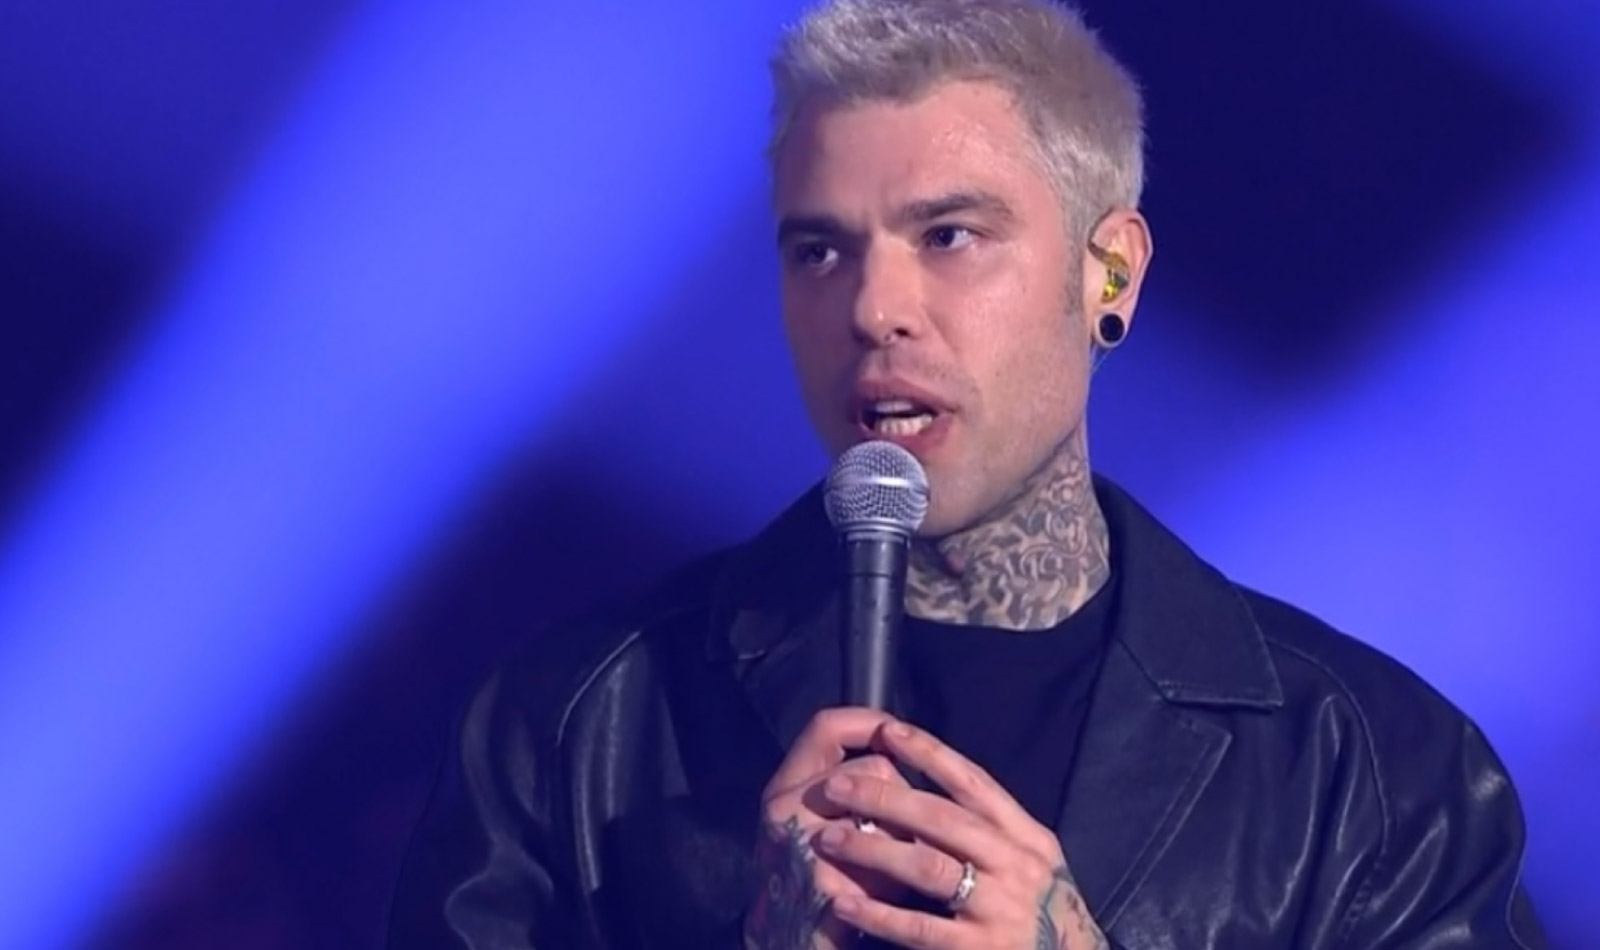 Sanremo 2023, Fedez against Codacons video and text